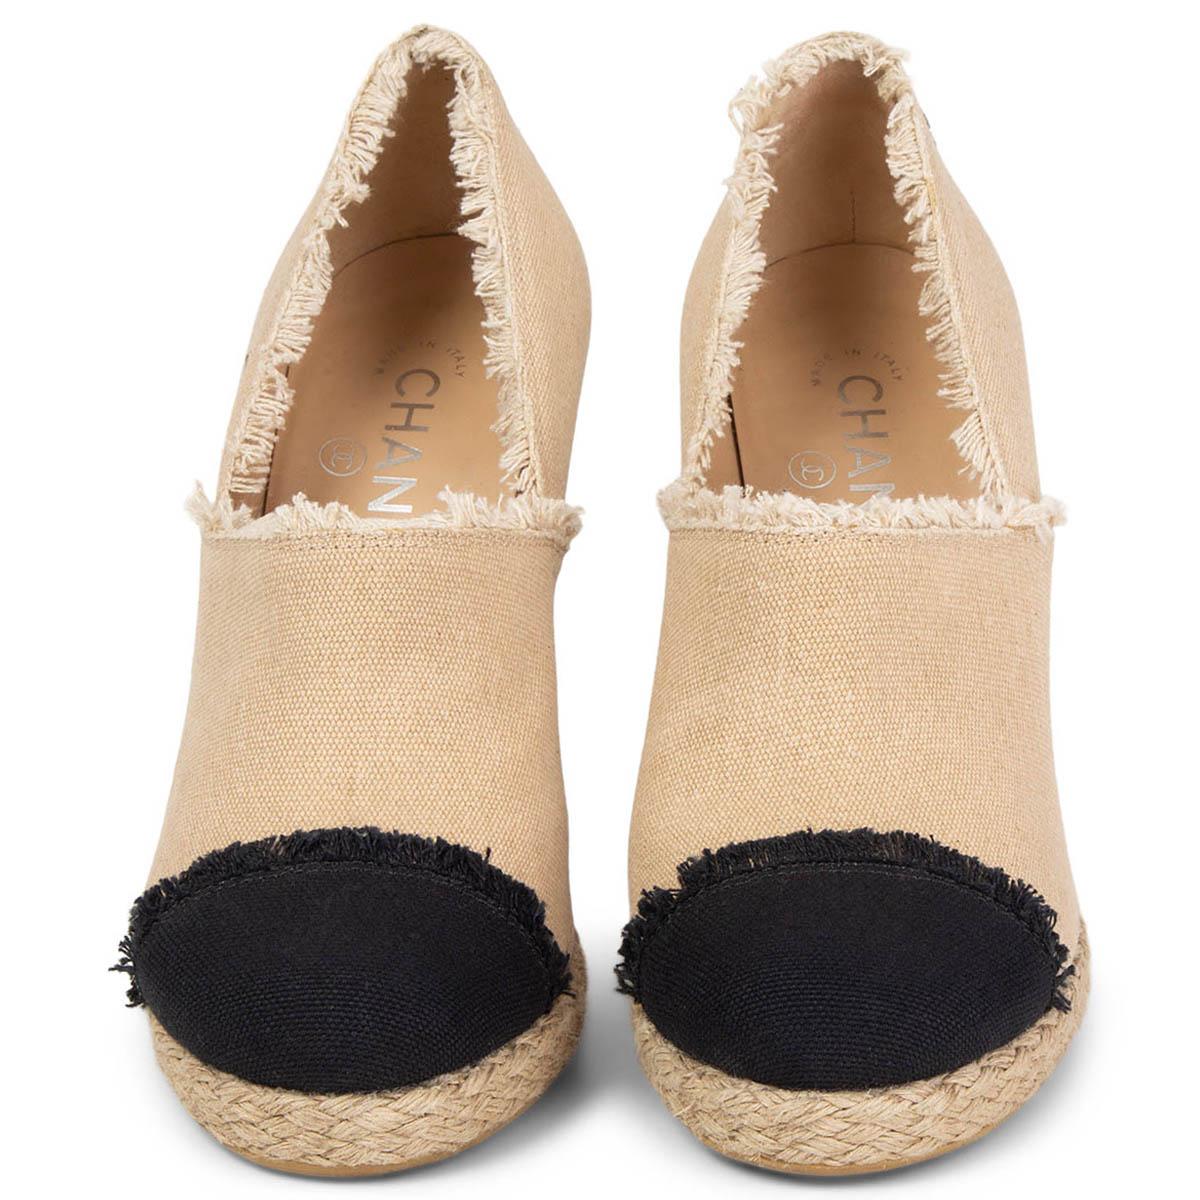 100% authentic Chanel espadrilles pumps in beige and black fringed canvas. Have been worn once and are in virtually new condition. Come with dust bag. 

Spring/Summer 2014 collection.

Measurements

Imprinted Size	38C
Shoe Size	38
Inside Sole	25cm